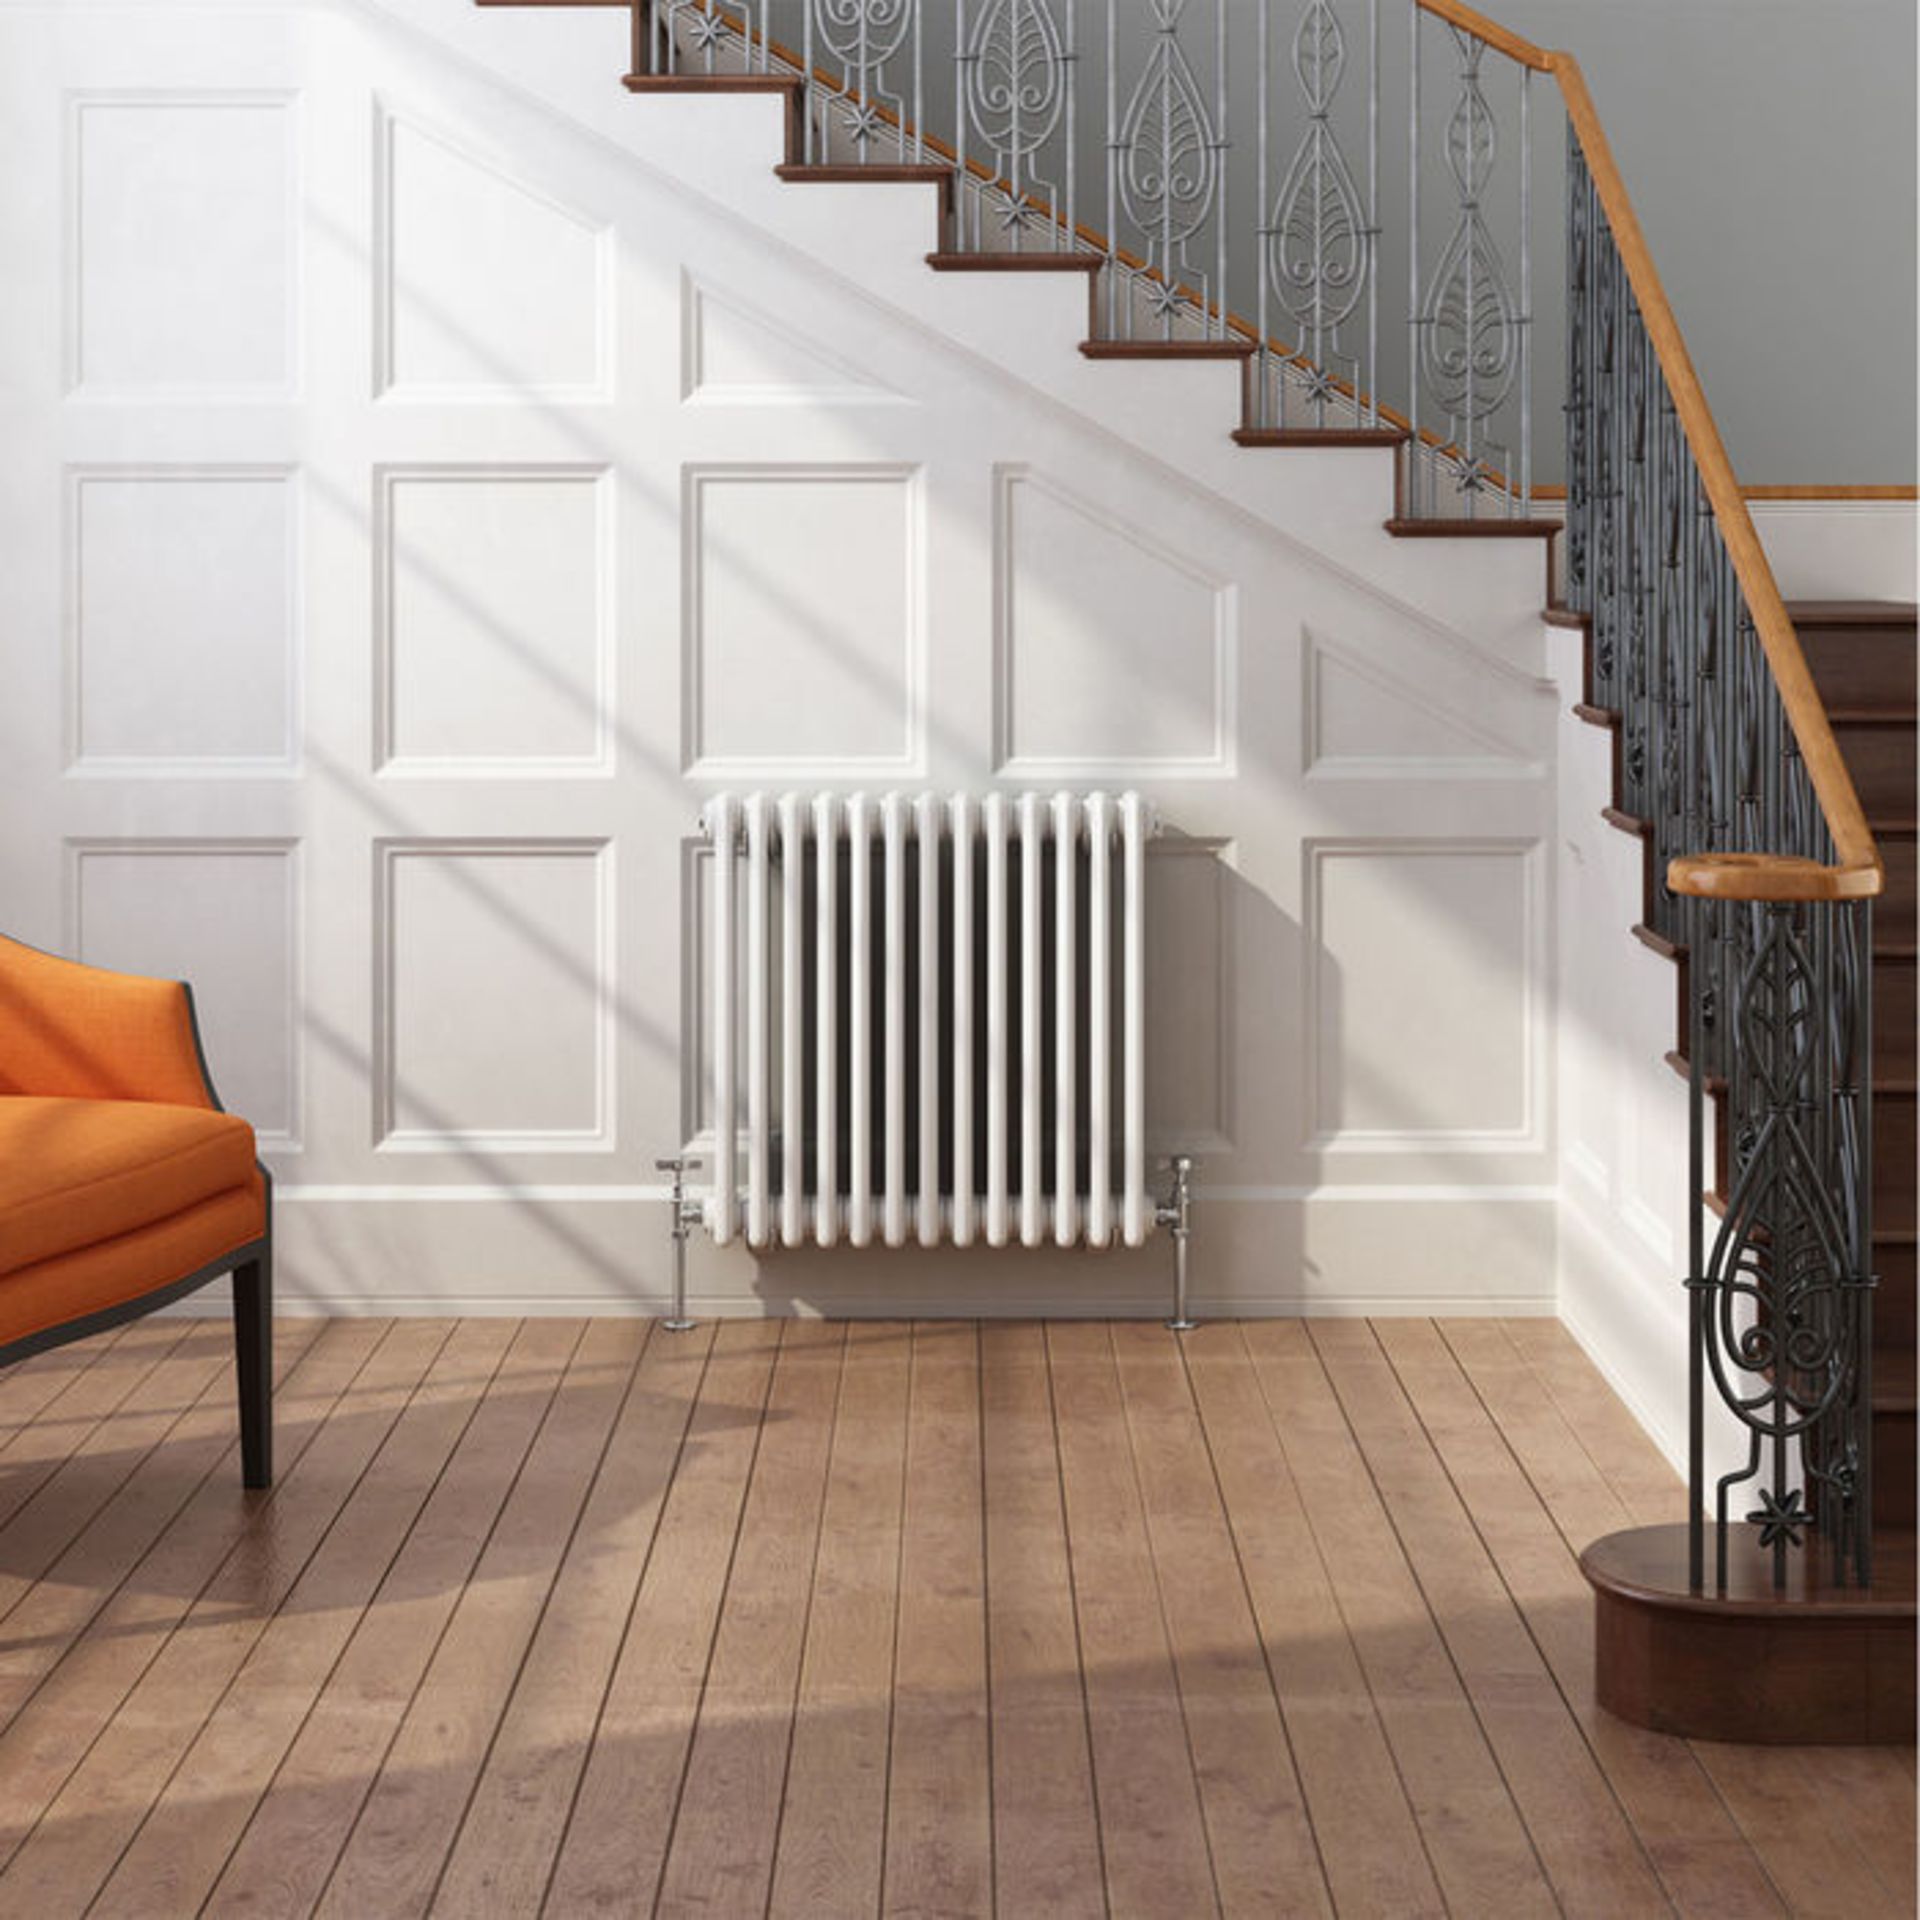 (OS263) 600x603mm White Double Panel Horizontal Colosseum Traditional Radiator. RRP £395.99. Made - Image 2 of 5